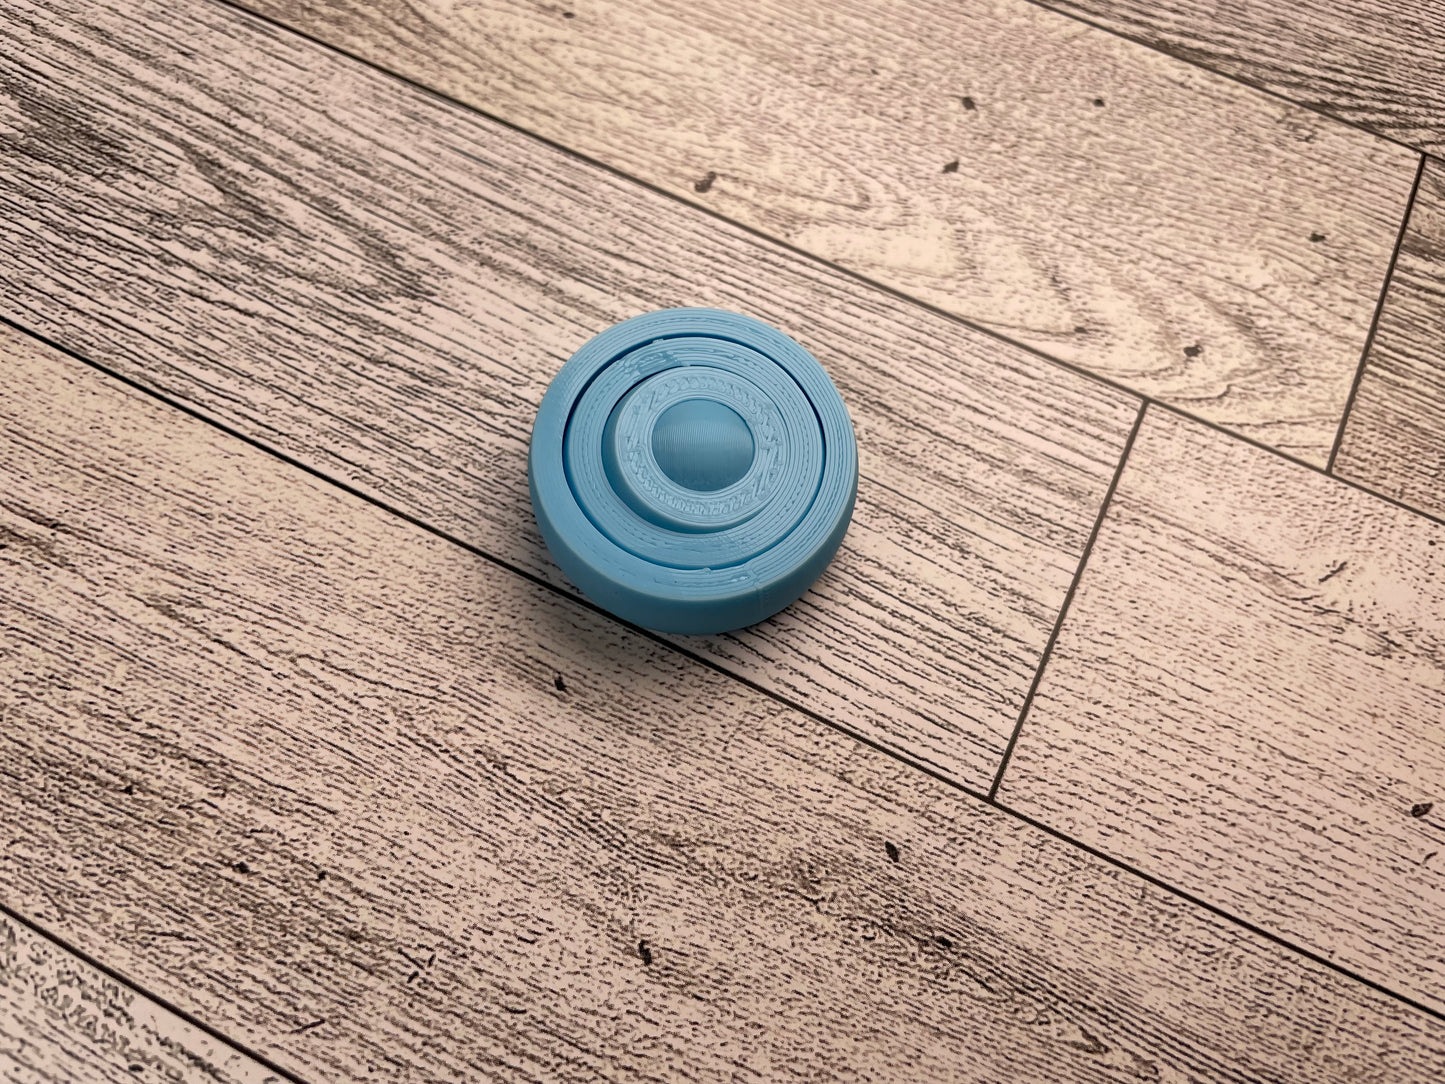 A small 3D printed gyro fidget that is about 1.5 inches in diameter on a wood background. It has four nested circles that can be spun and twirled. It is printed in light blue filament.